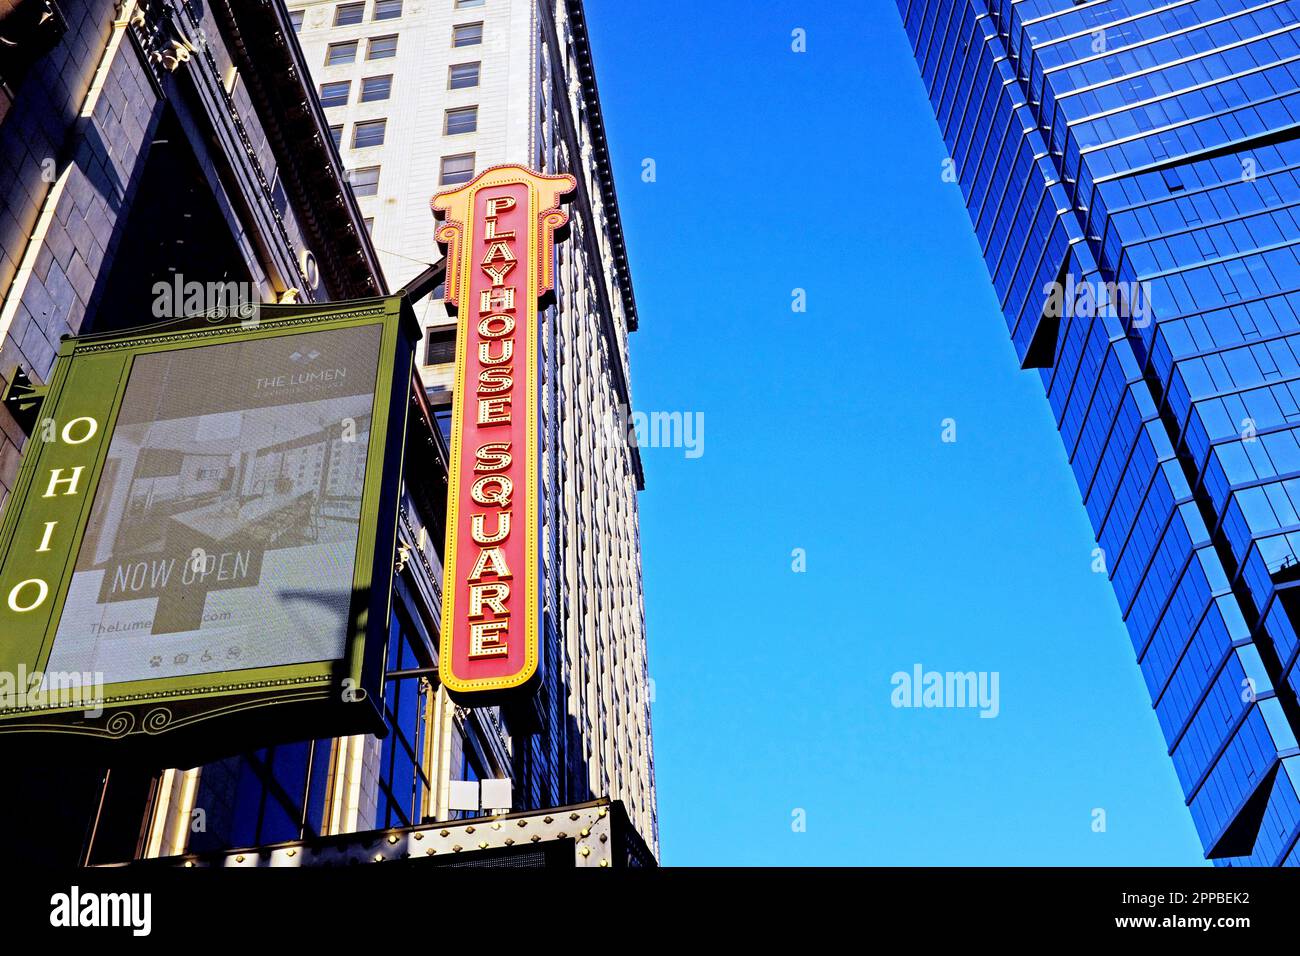 Modern and historic buildings in the Playhouse Square Theater District in downtown Cleveland, Ohio, USA.  Playhouse Square is the second largest performing arts center in the United States. Stock Photo